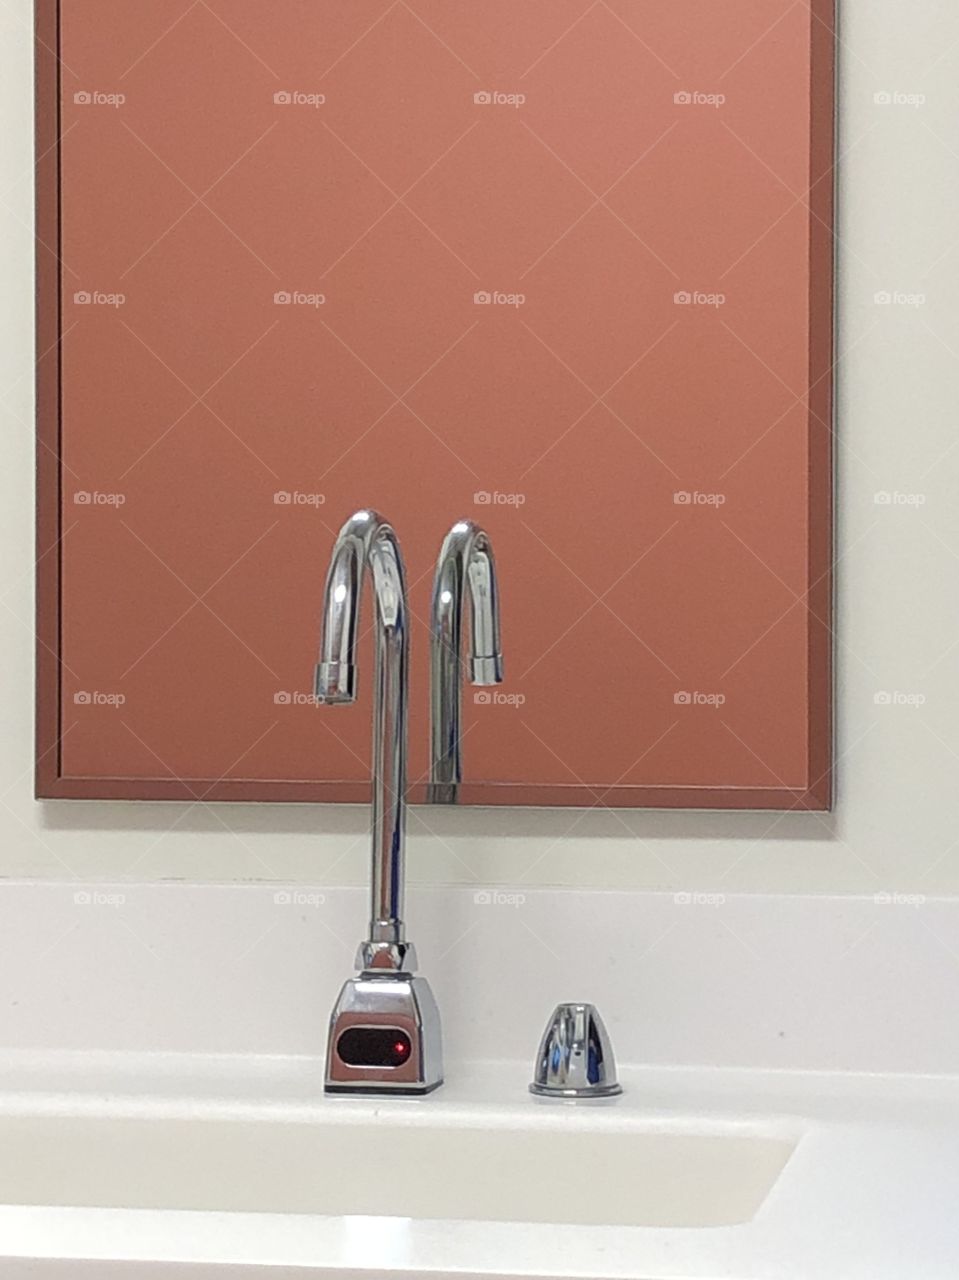 Reflection of a faucet